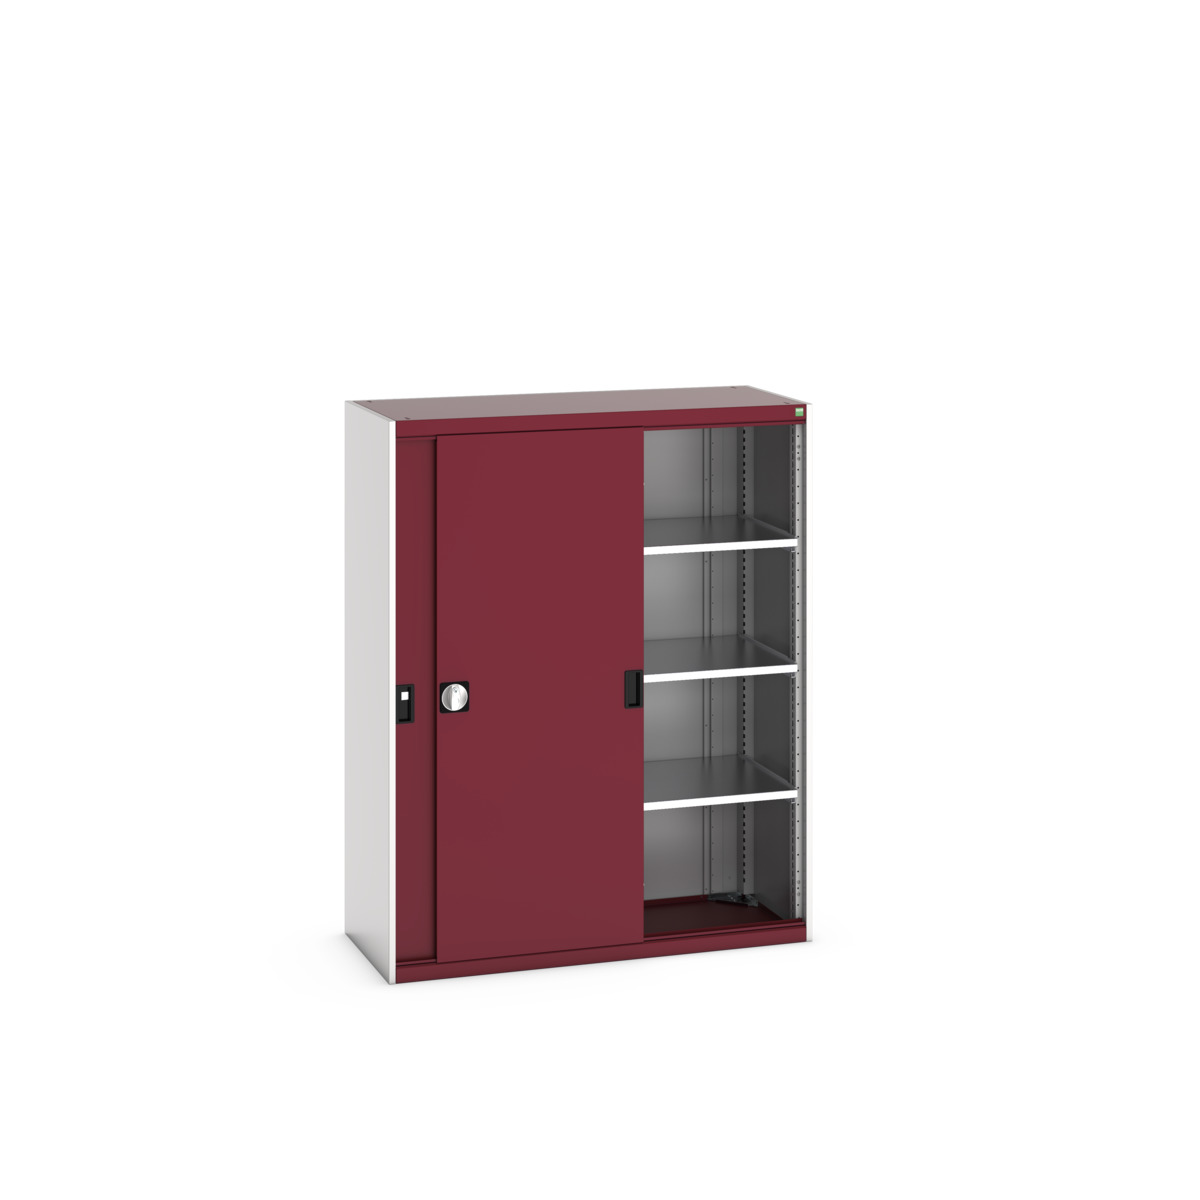 40014064.24V - Armoire Cubio SMS-13516-1